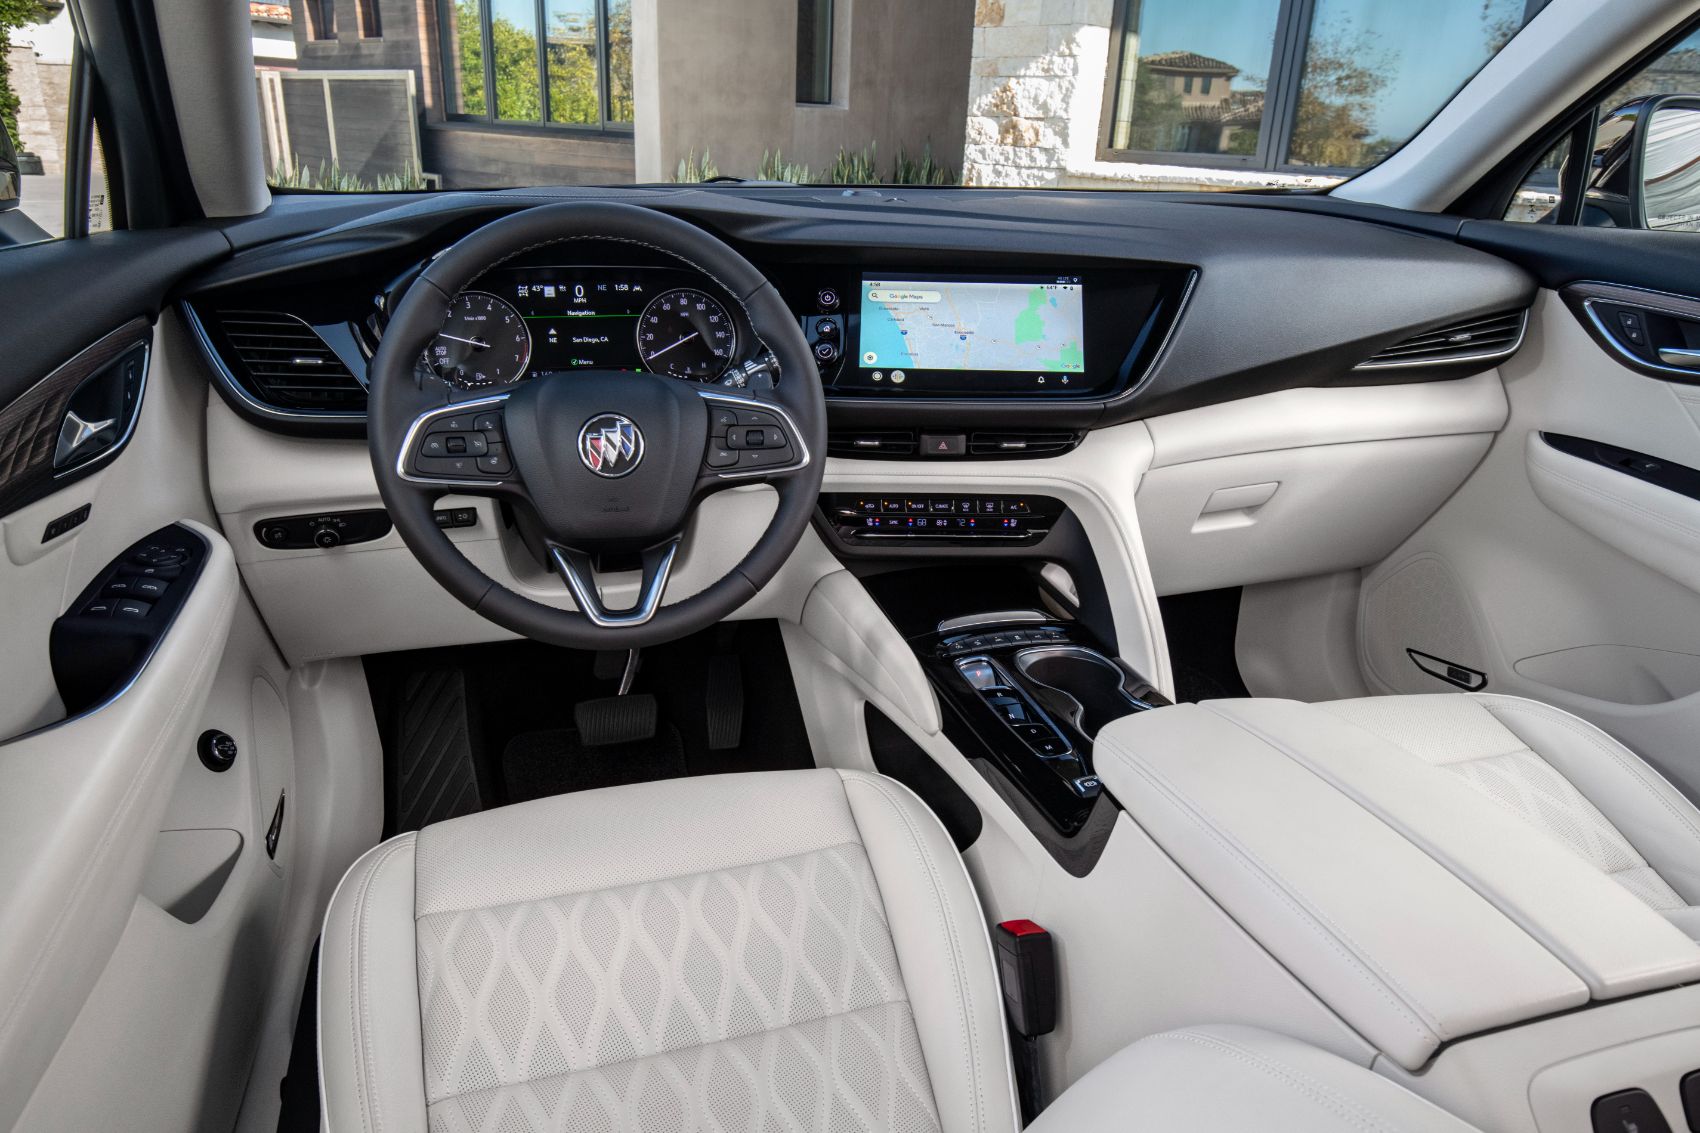 2022 Buick Lineup Overview: Refreshed Styling & New Features for